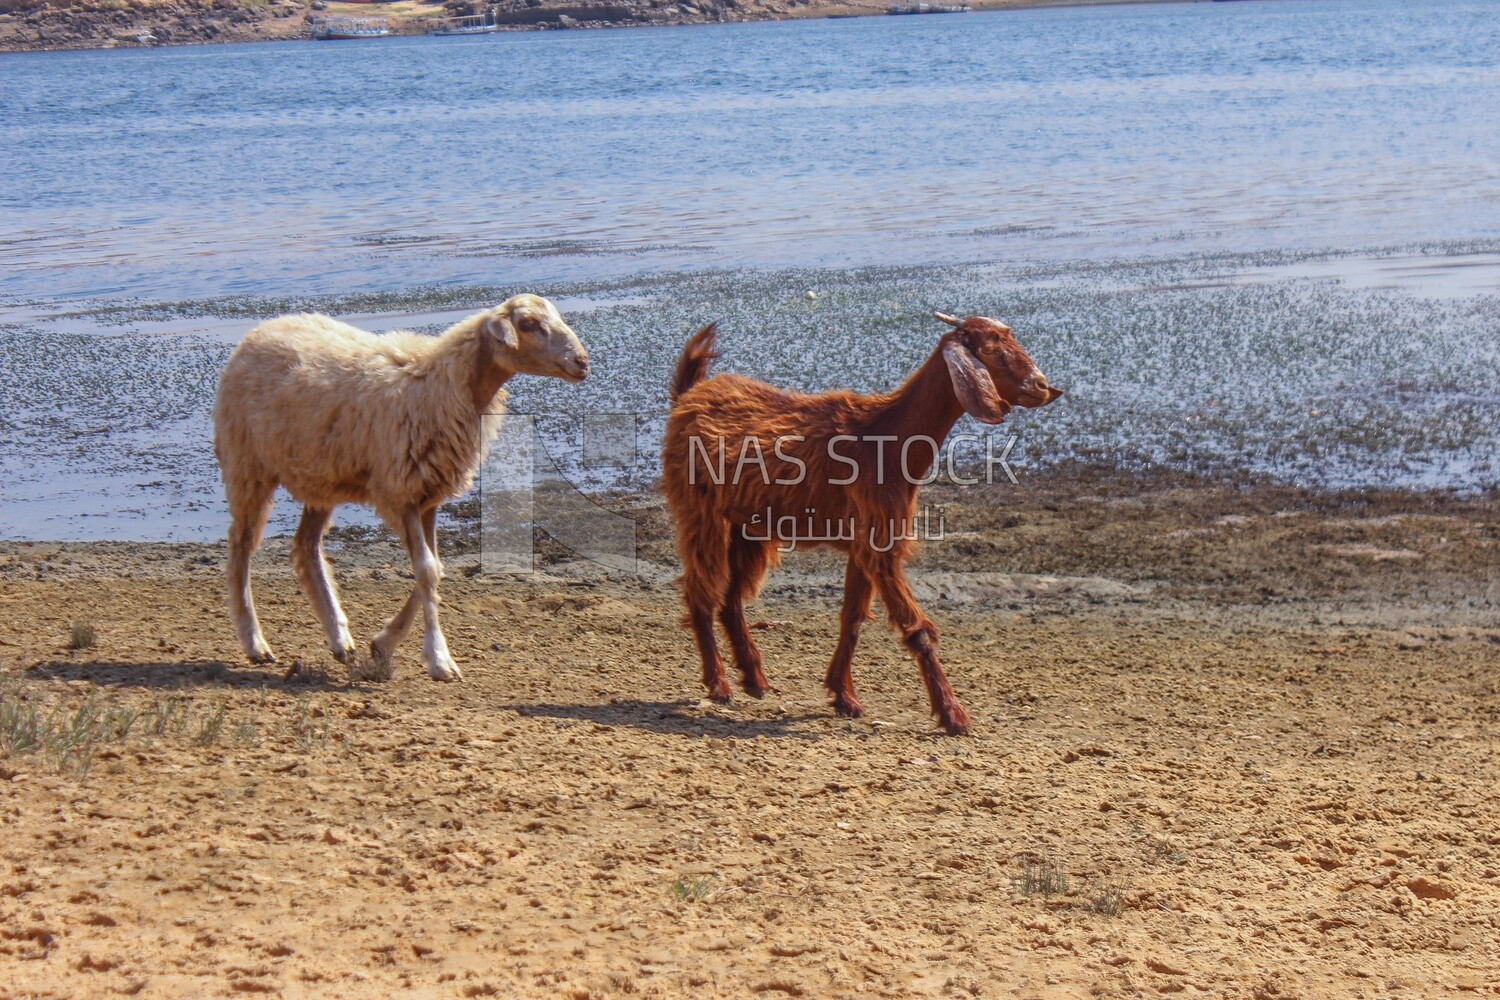 A sheep and a goat walking on the beach